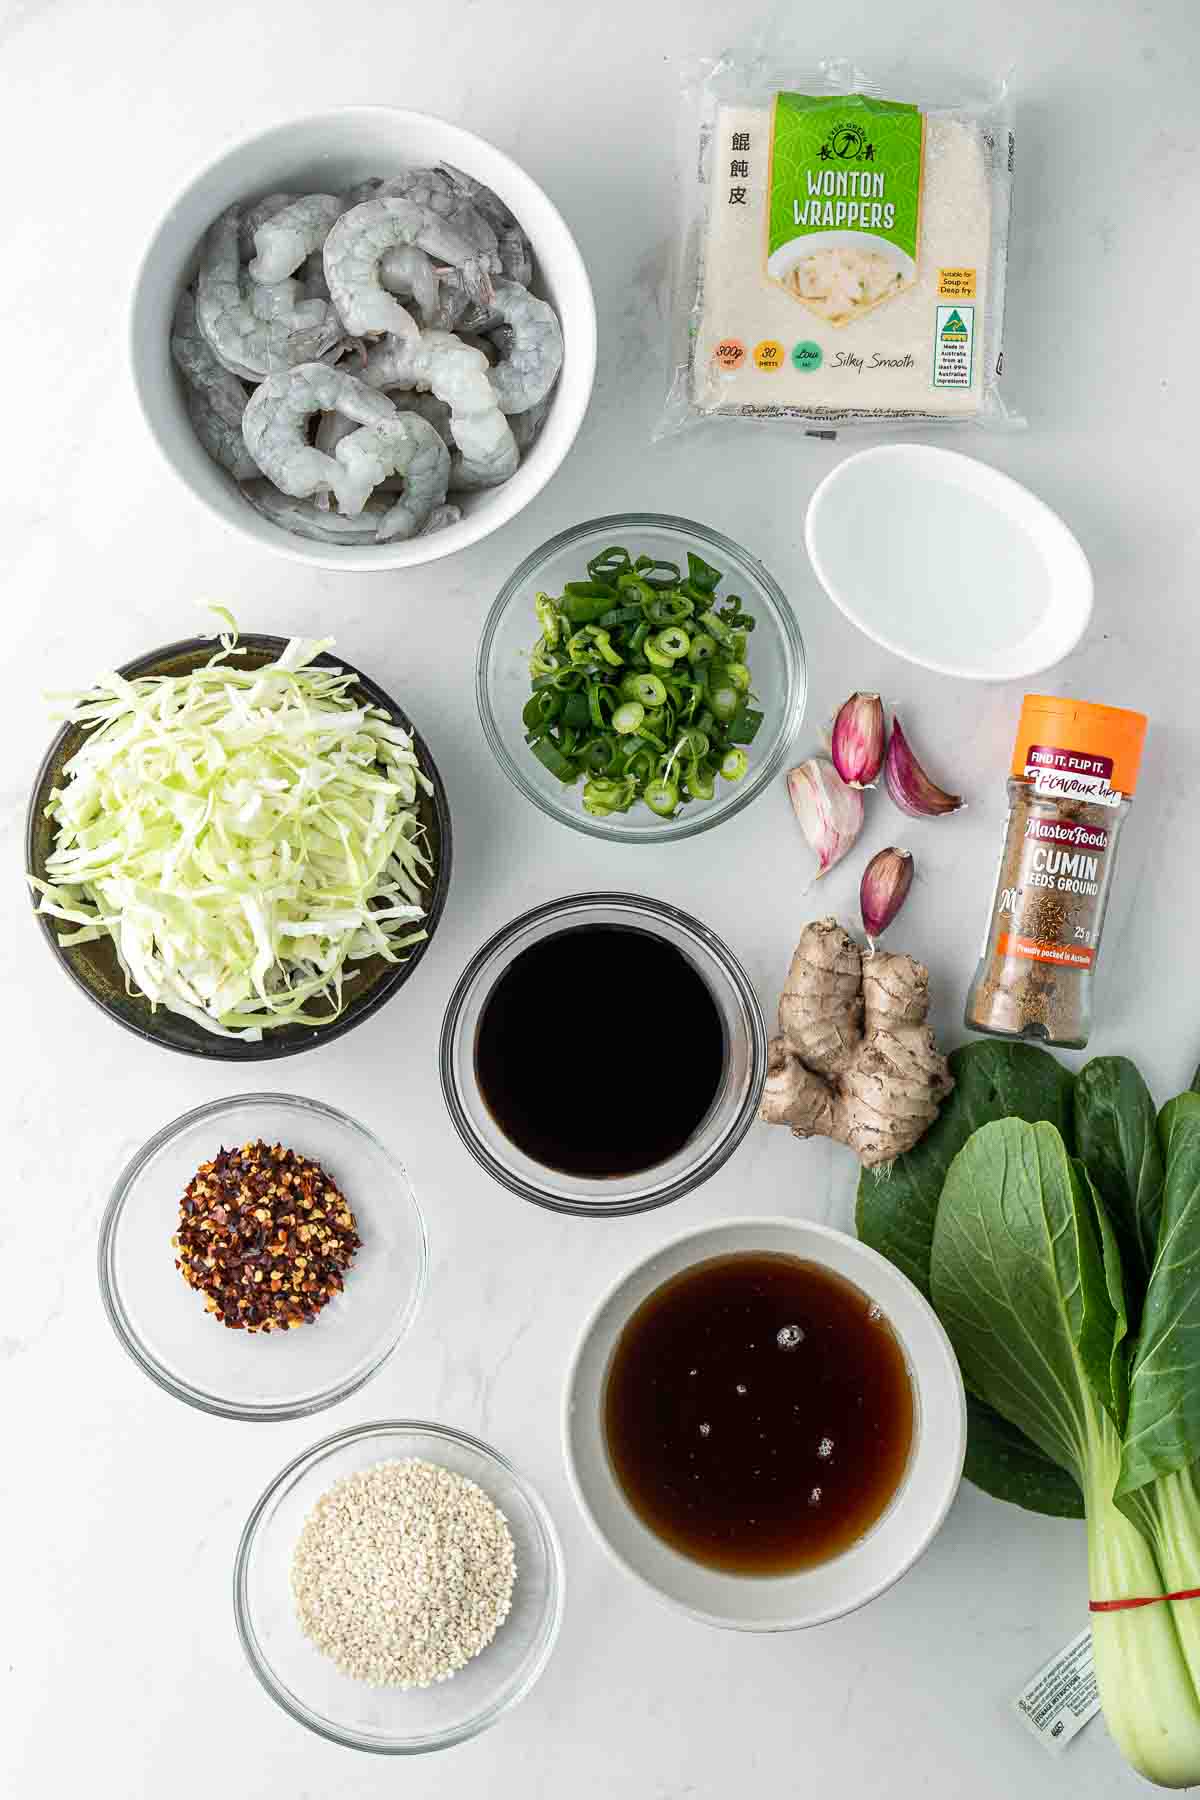 All ingredients needed to make wontons and chilli oil laid out in bowls.